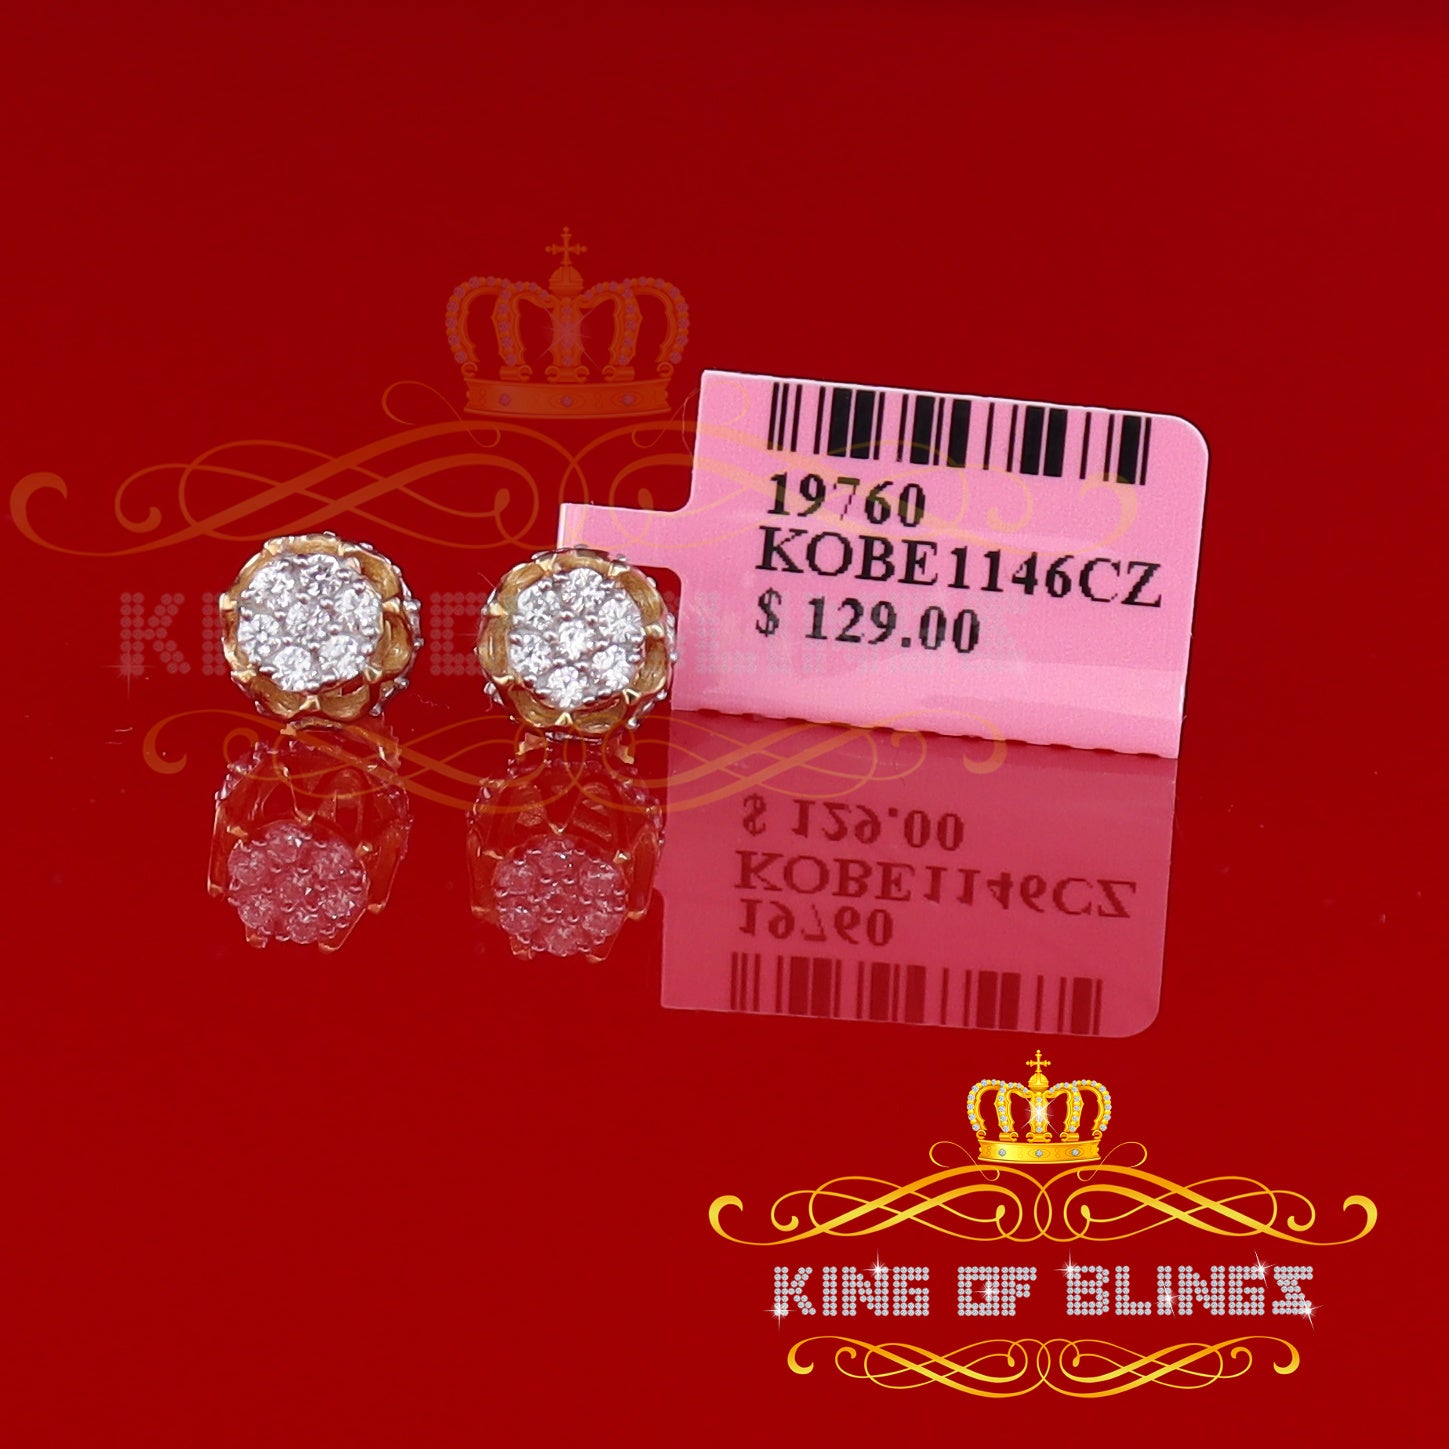 King of Bling's Yellow 925 Silver Sterling 0.36ct Cubic Zirconia Hip Hop Floral Women's Earrings KING OF BLINGS